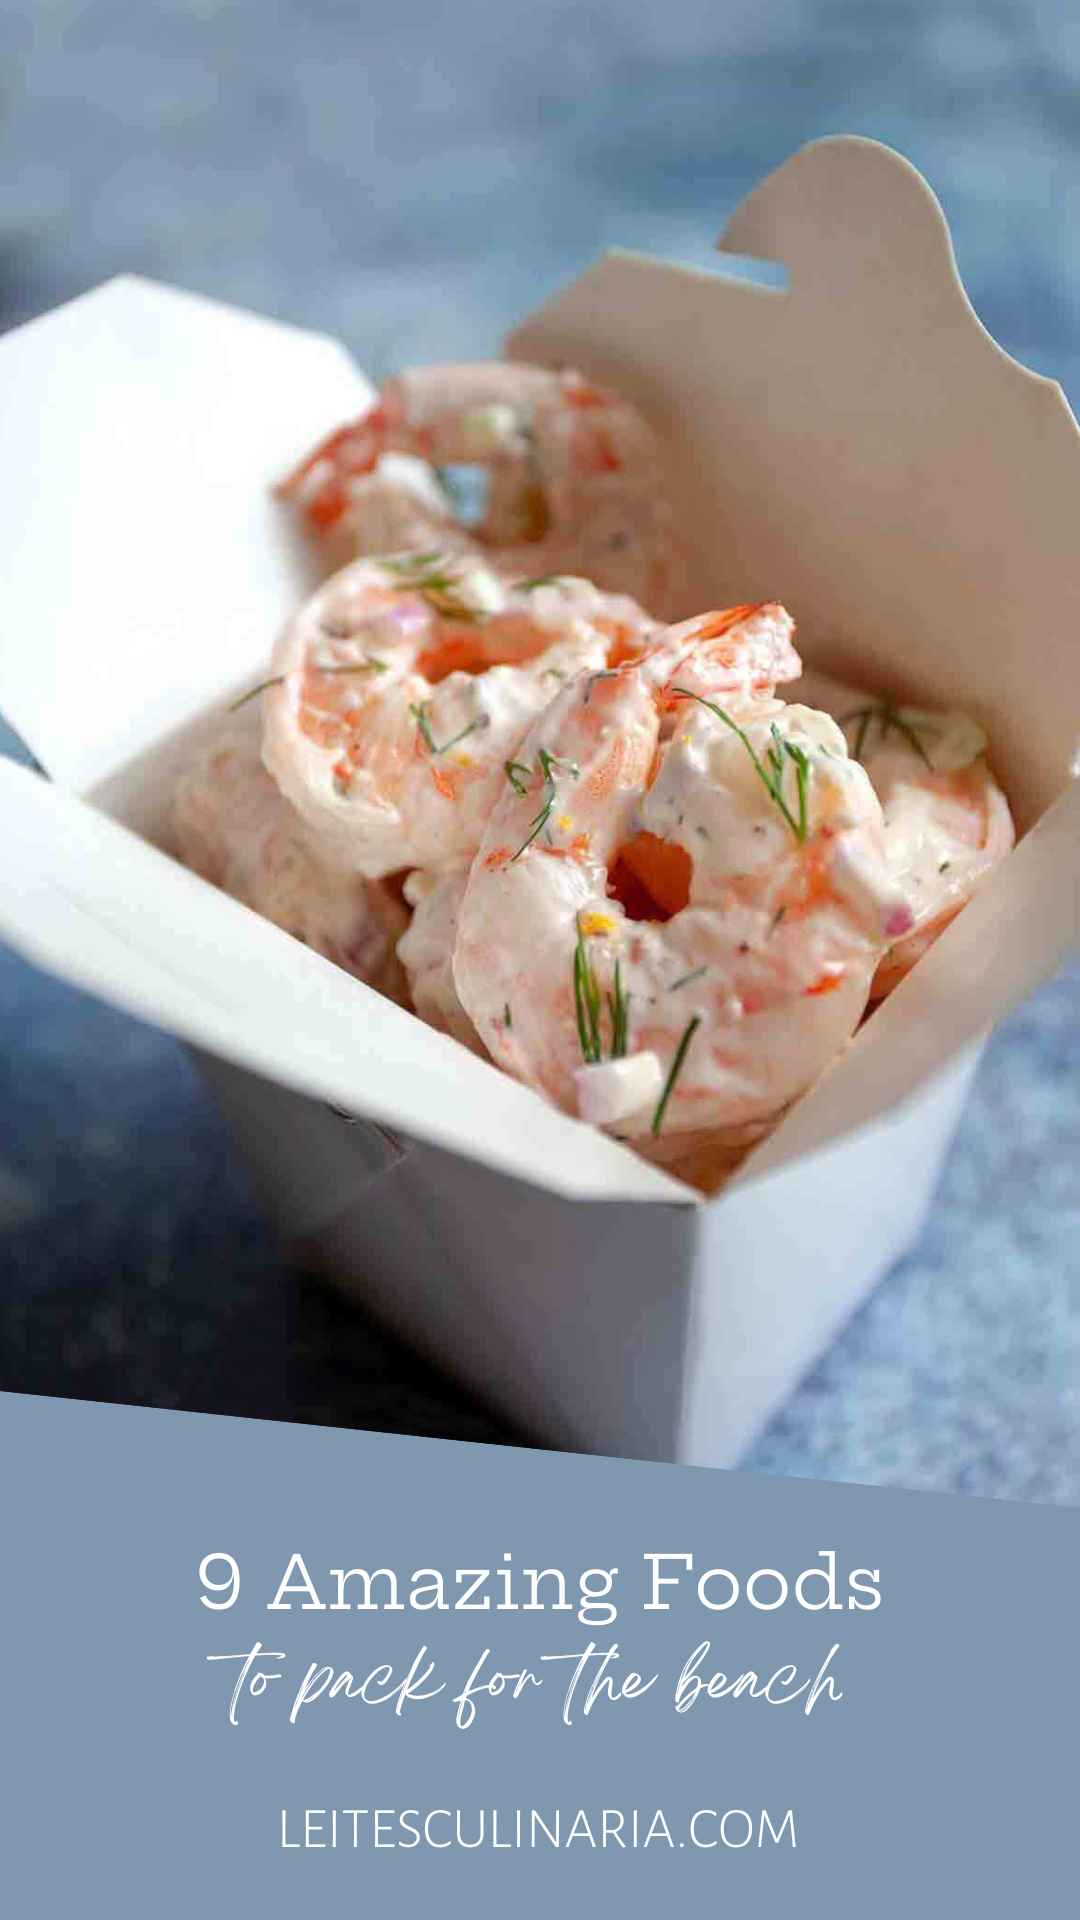 A white takeout container filled with shrimp salad.